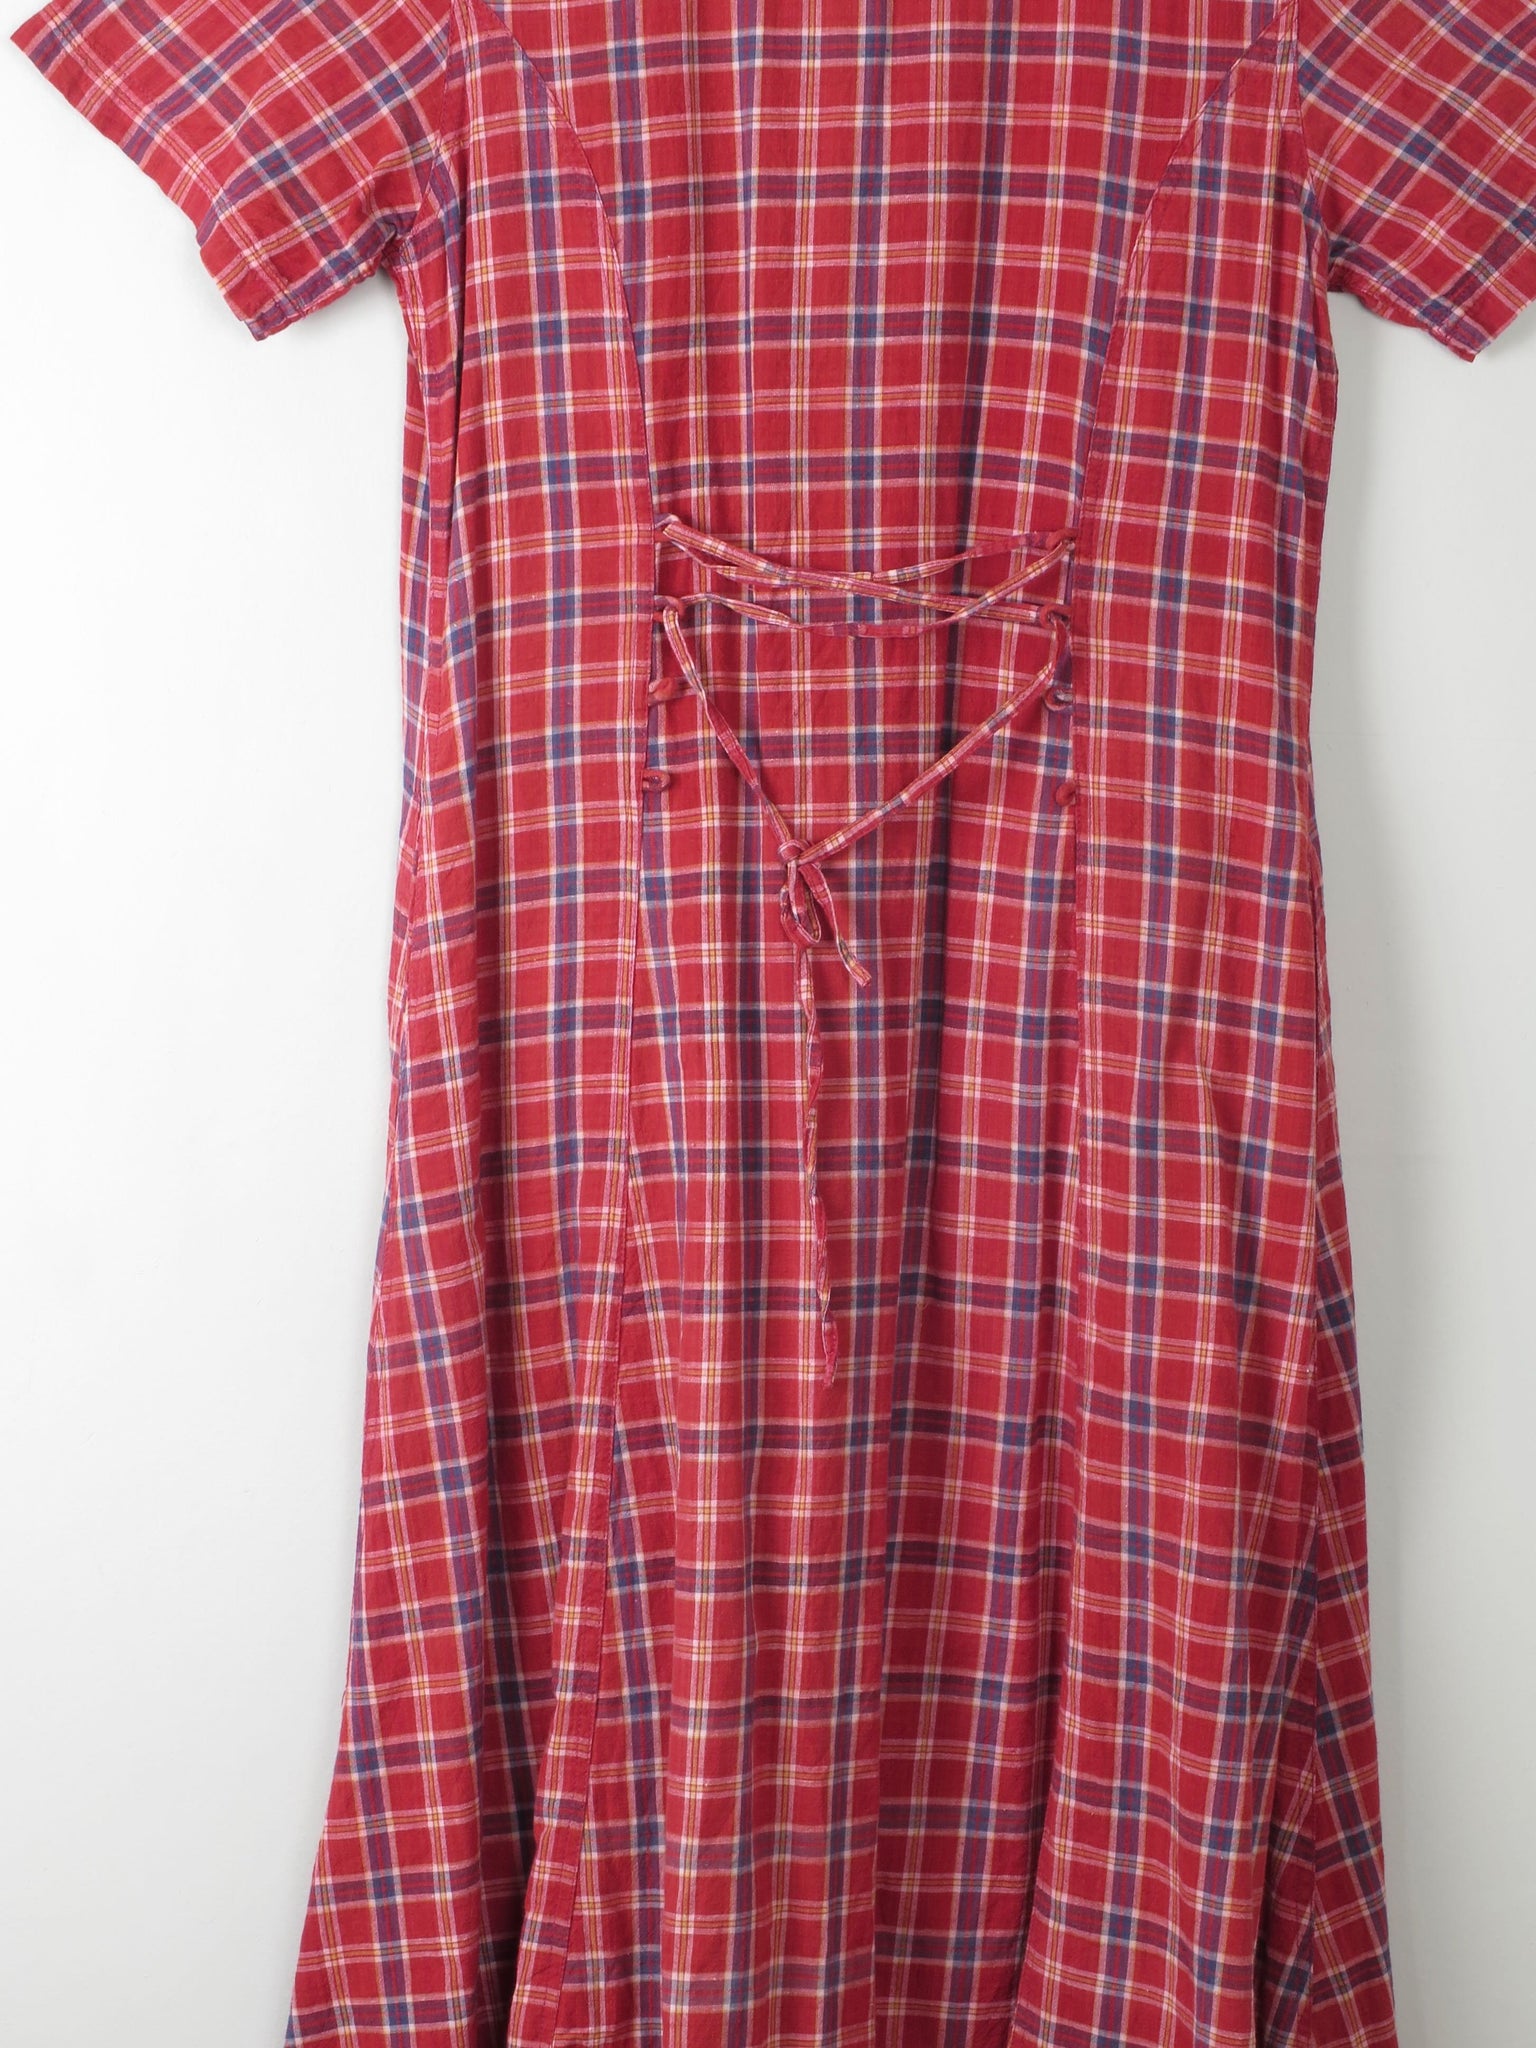 Vintage Red Check Maxi Dress Button Down S - The Harlequin